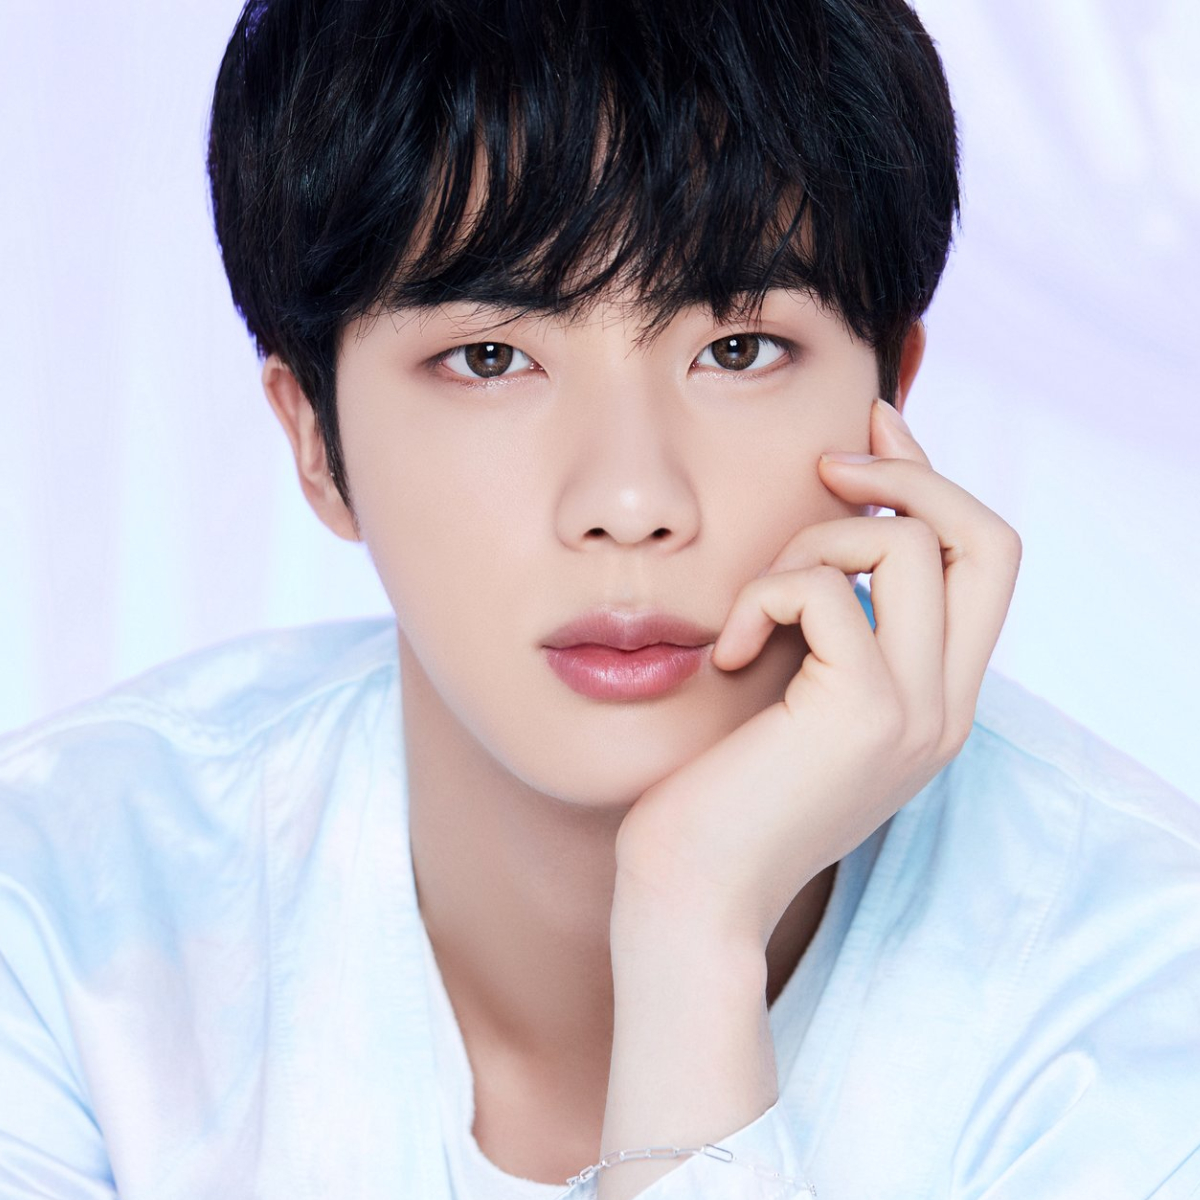 Jin from BTS is one of the most handsome faces according to Korean beauty standards.